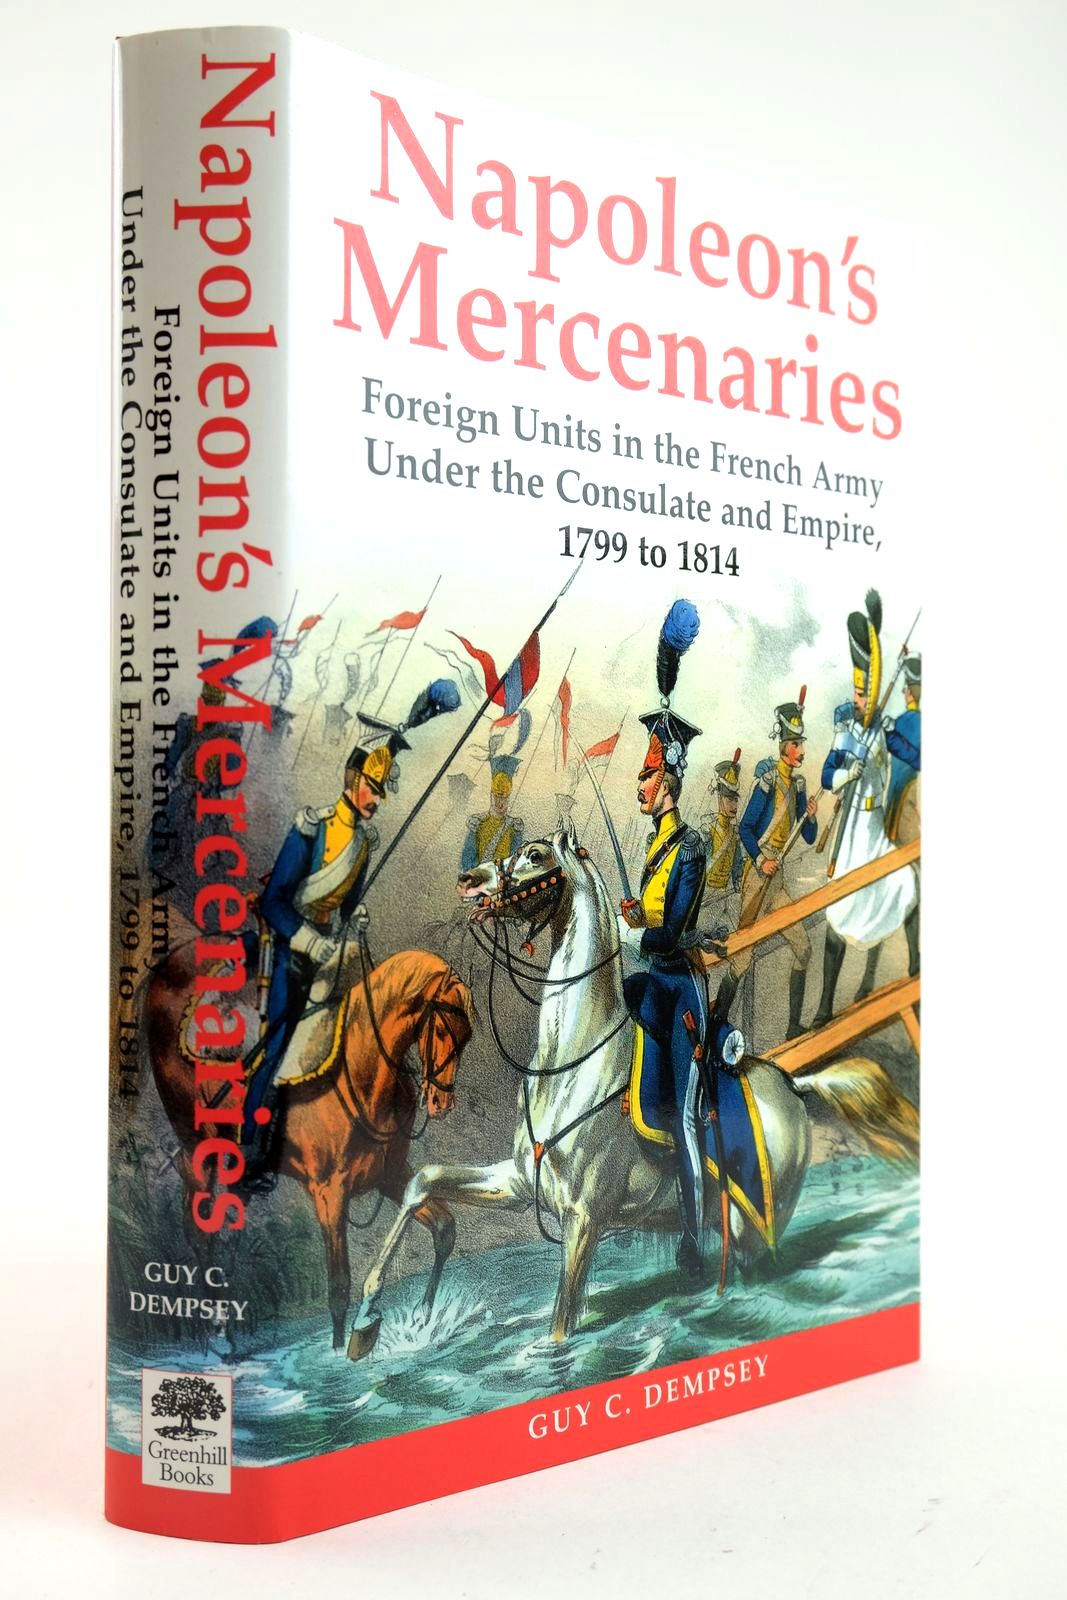 Photo of NAPOLEON'S MERCENARIES written by Dempsey, Guy C. published by Greenhill Books (STOCK CODE: 2132898)  for sale by Stella & Rose's Books